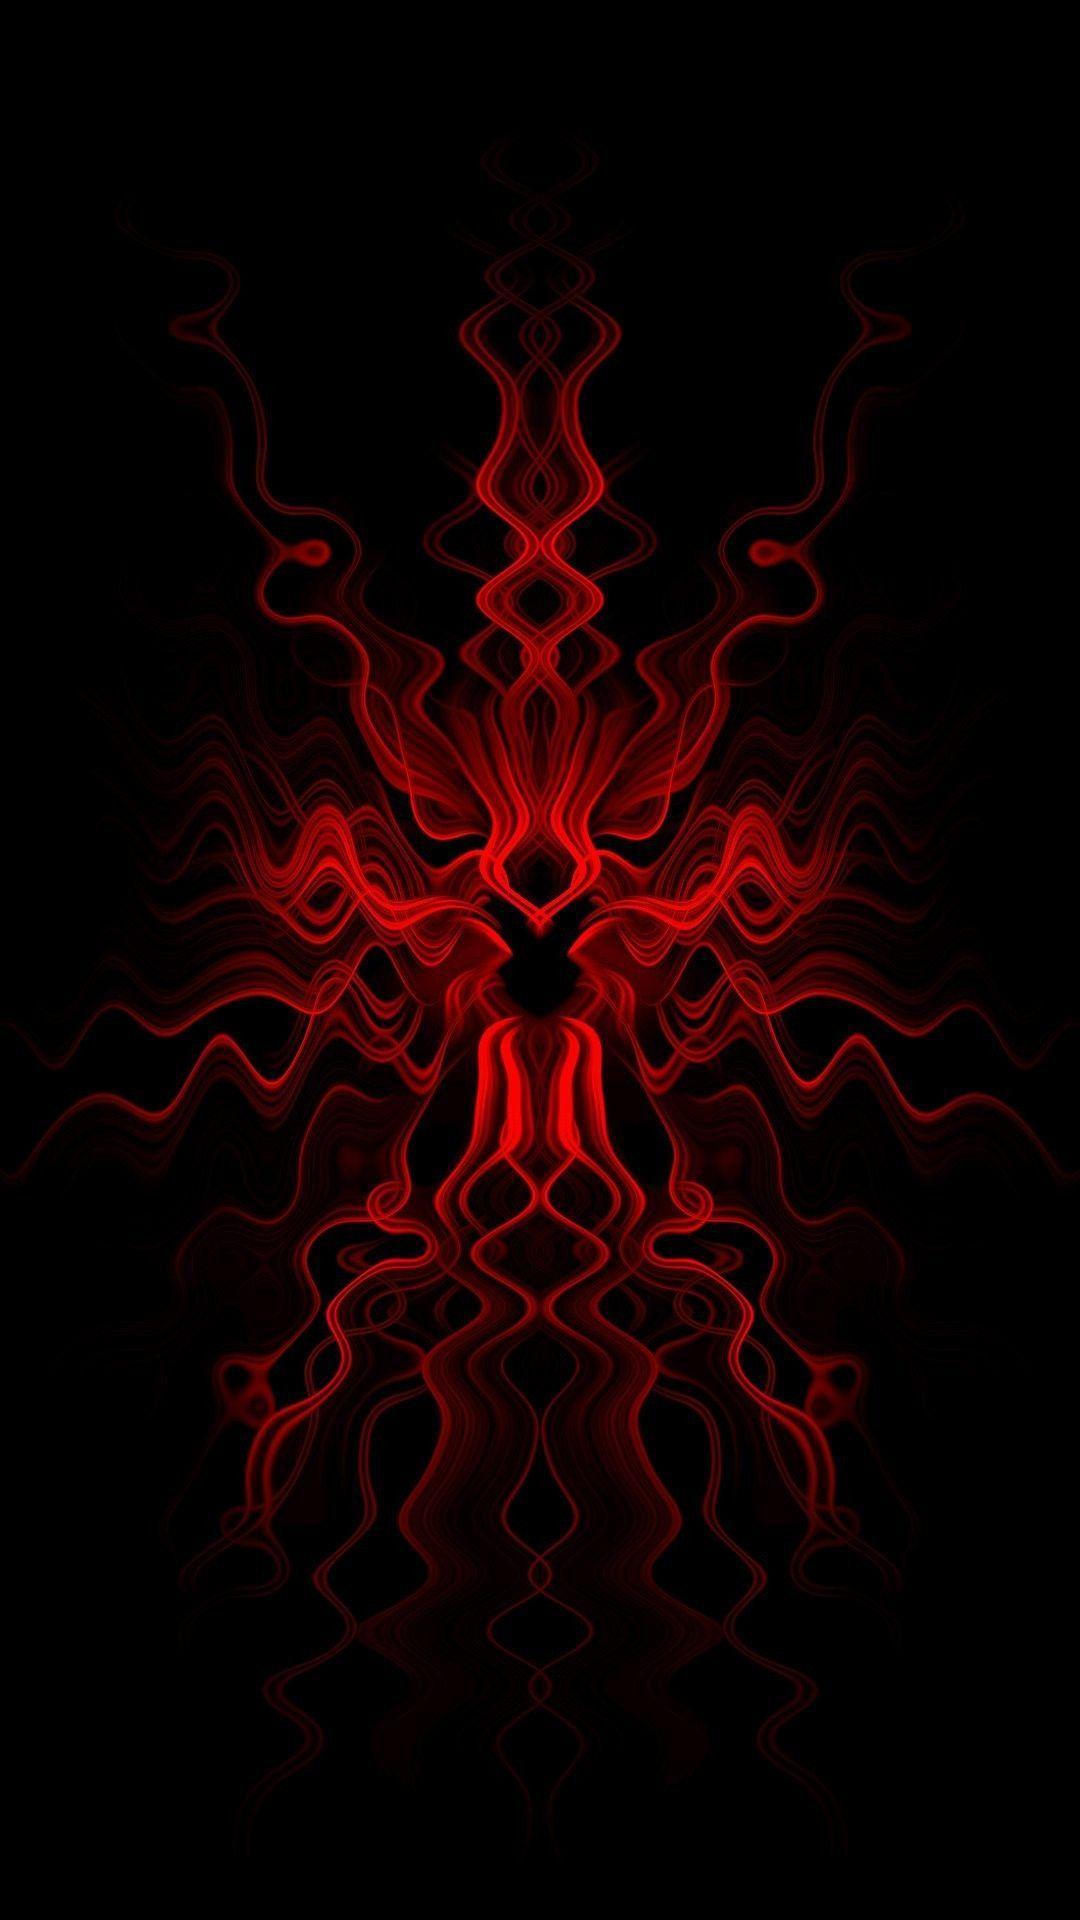 Red and Black Android Wallpapers - Top Free Red and Black Android ...